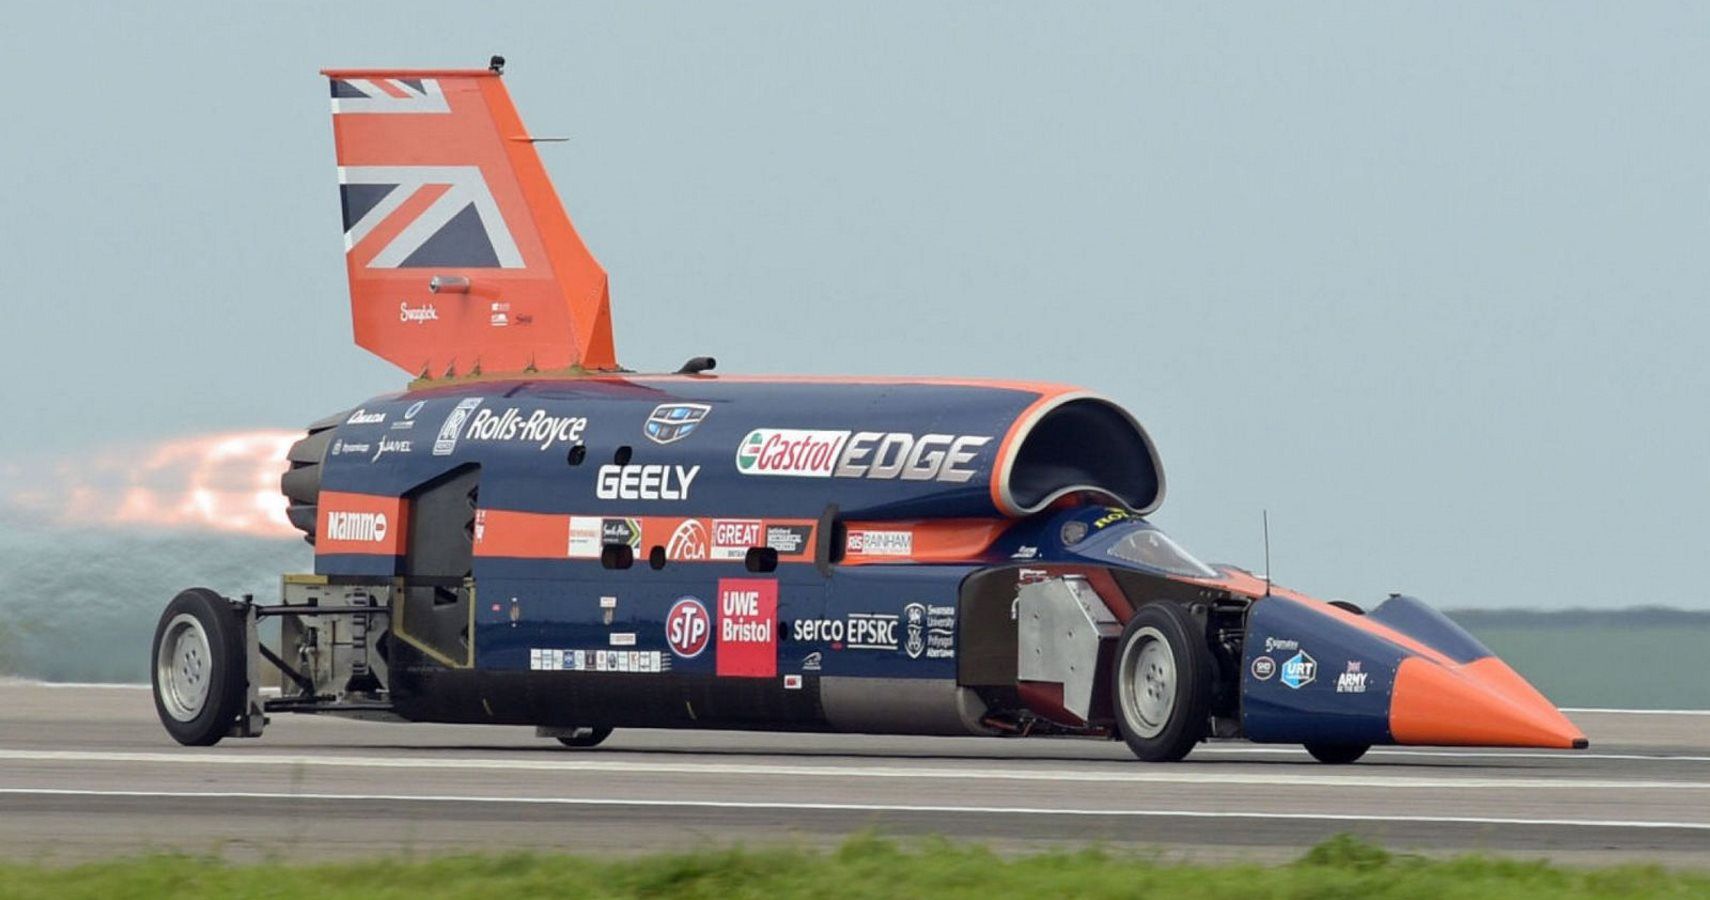 Bloodhound Supersonic Car Can Hit 1,000 MPH & Is For Sale At The Cost Of A McLaren